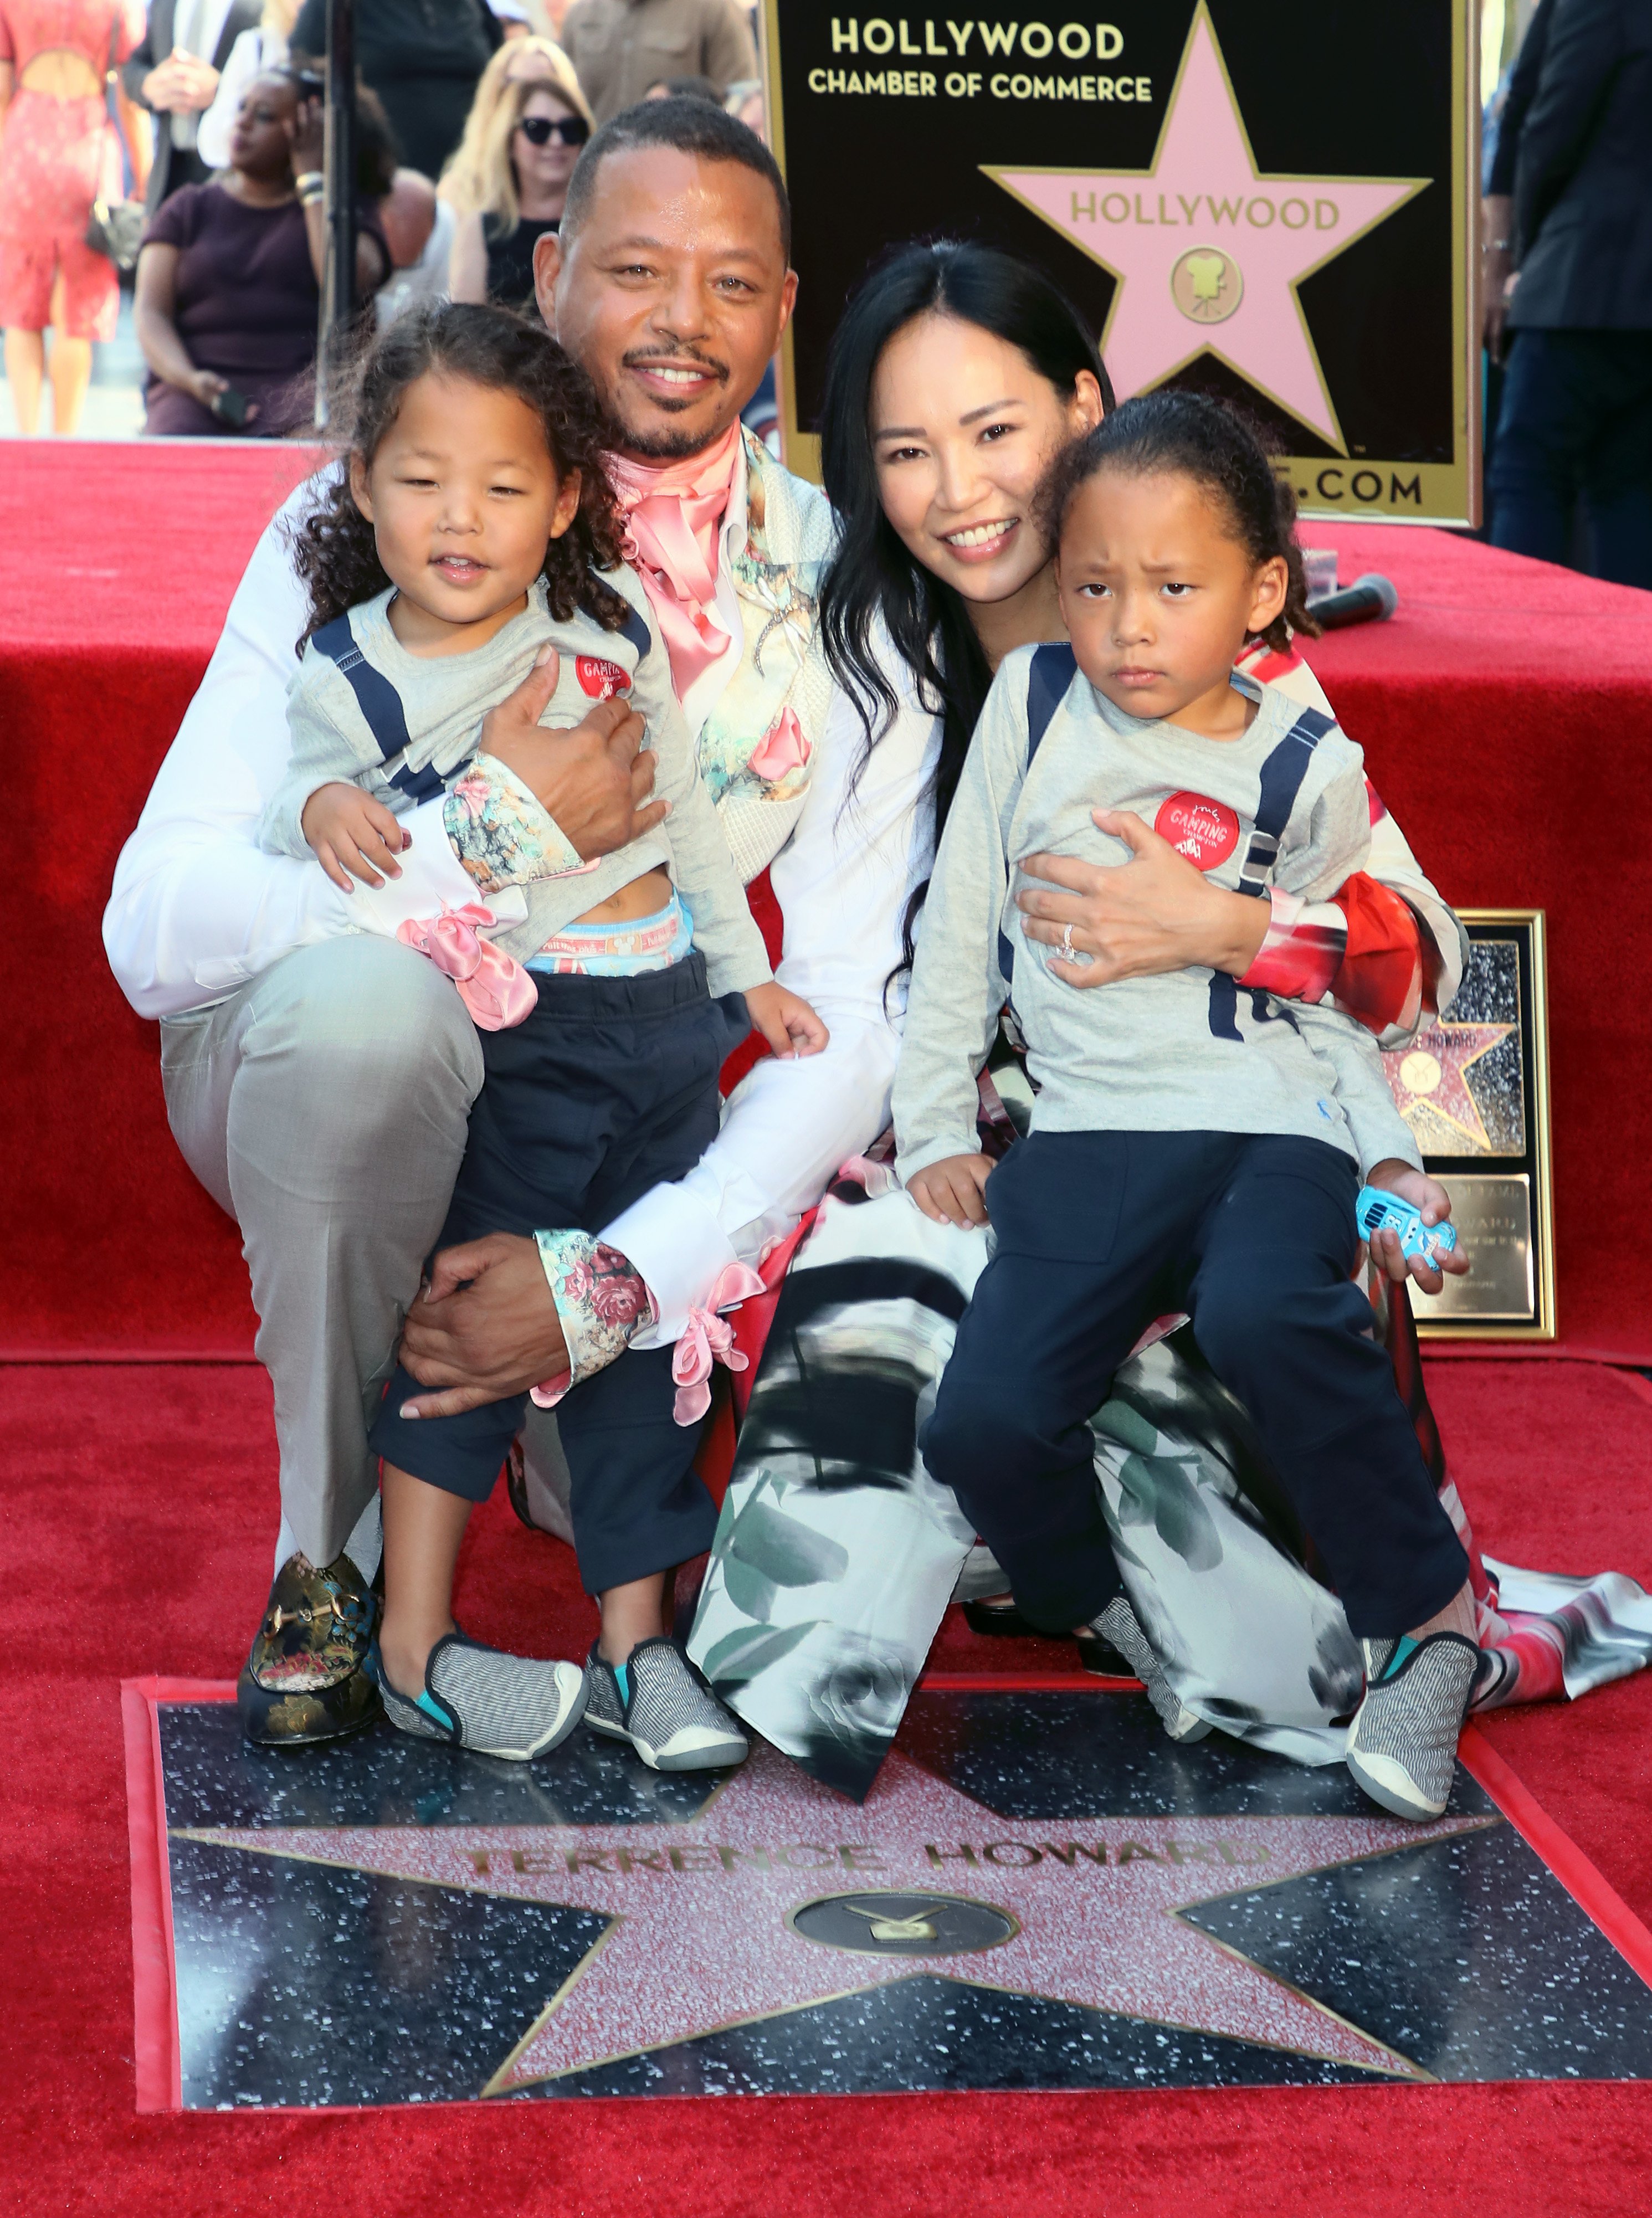 Terrence Howard, Mira Pak and sons Hero Howard and Quirin Howard attend on the Hollywood Walk of Fame on, September 24, 2019, in Hollywood, California. | Source: Getty Images